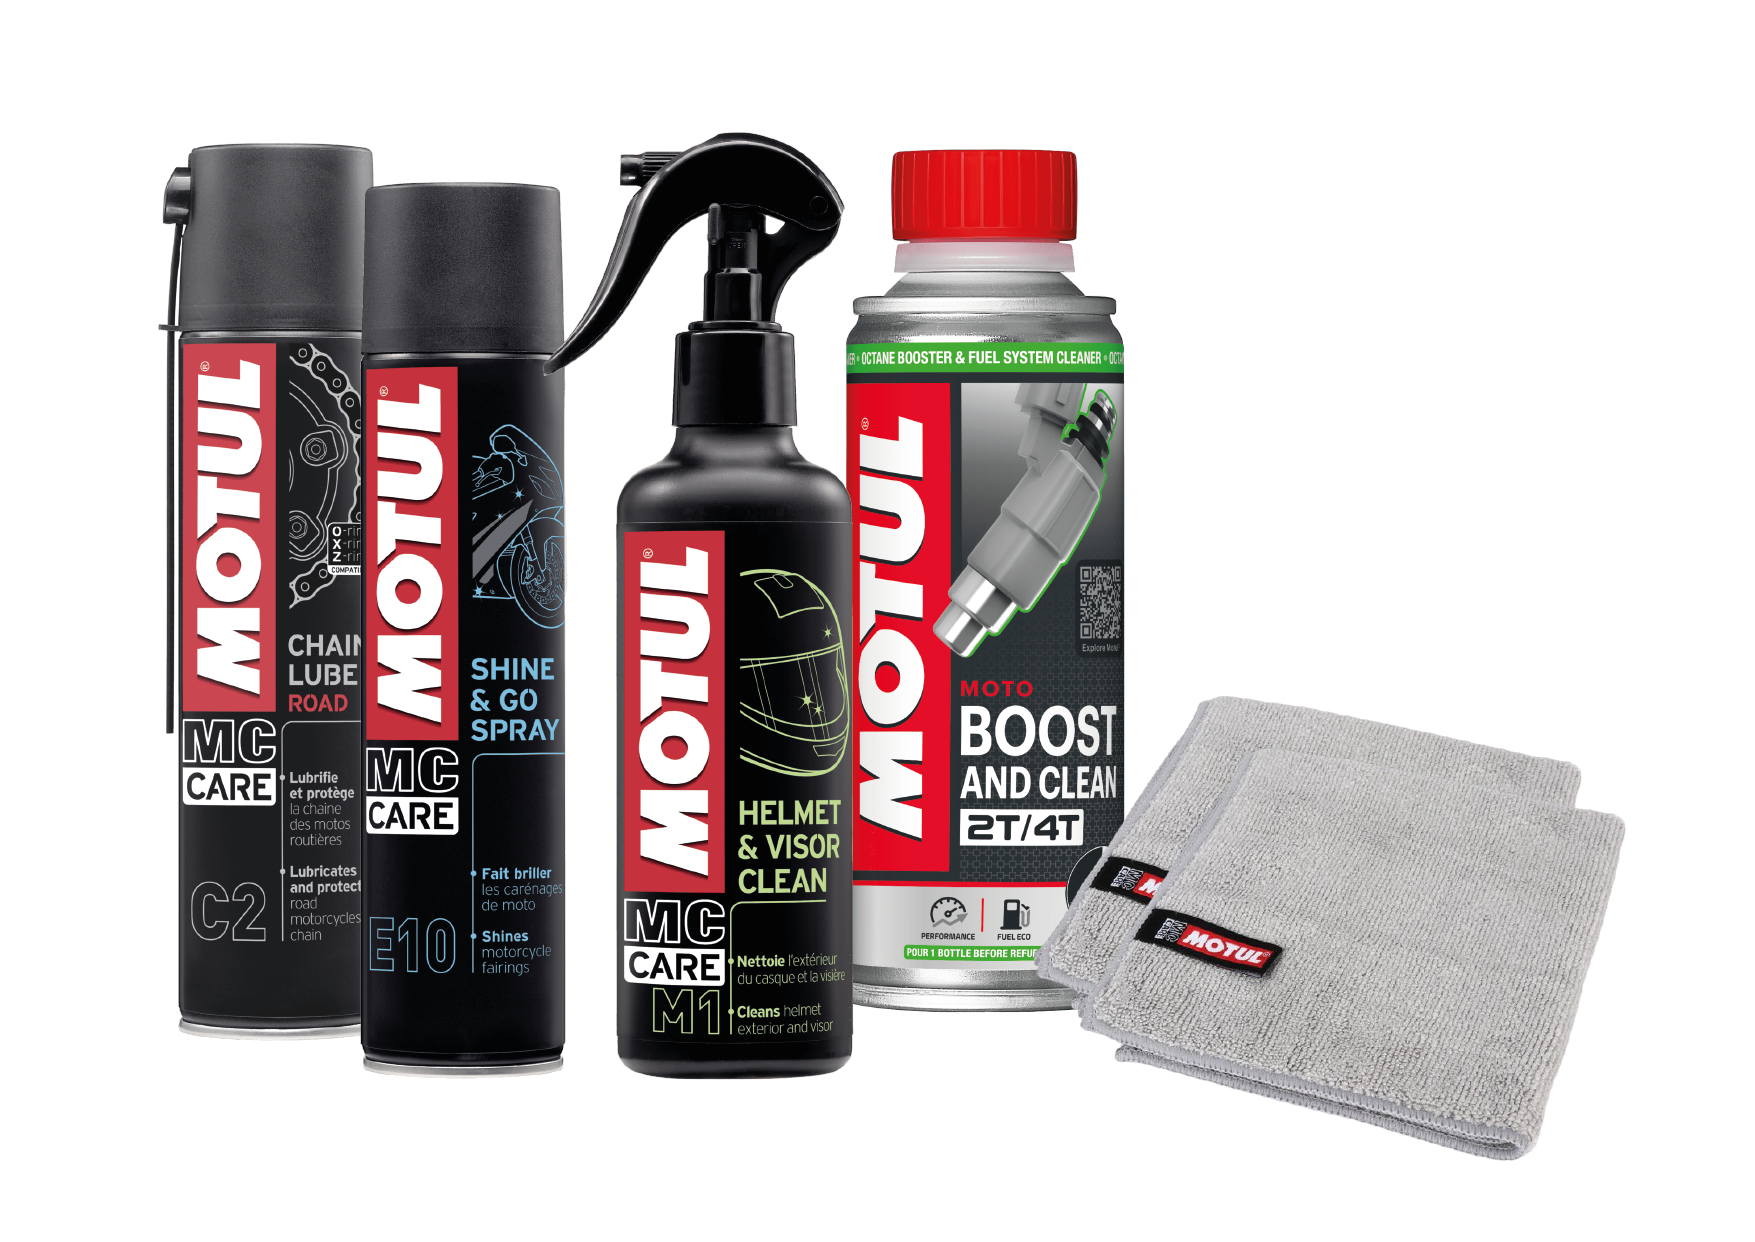 PROMO2 The Ready-to-Ride Kit contains various products to help you get back on your way!